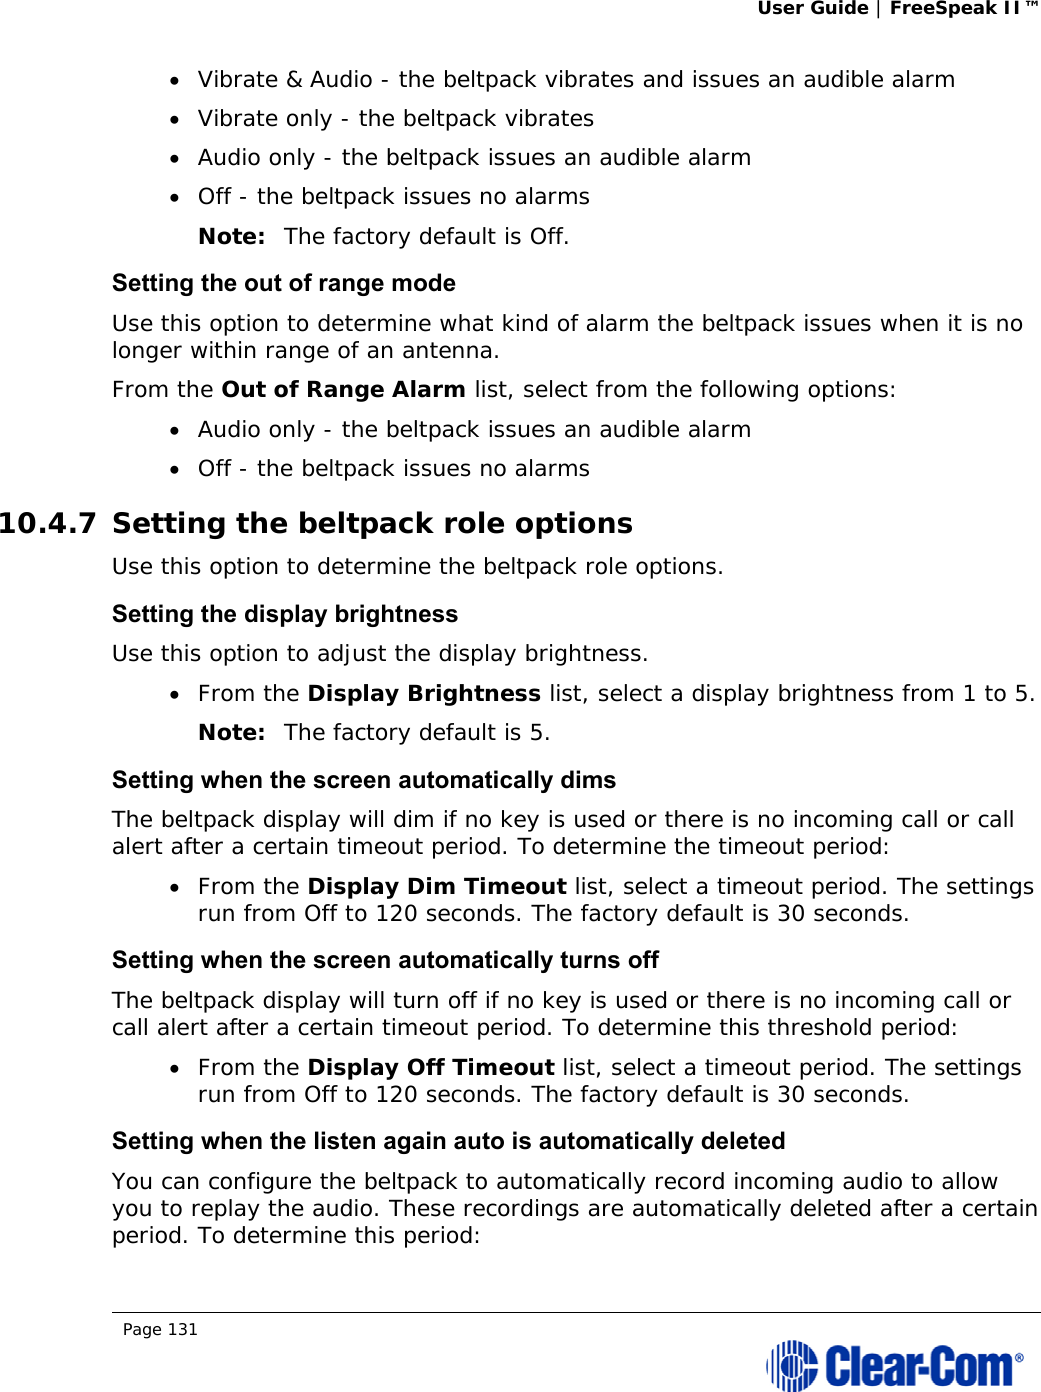 User Guide | FreeSpeak II™  Page 131   Vibrate &amp; Audio - the beltpack vibrates and issues an audible alarm  Vibrate only - the beltpack vibrates  Audio only - the beltpack issues an audible alarm  Off - the beltpack issues no alarms Note: The factory default is Off. Setting the out of range mode Use this option to determine what kind of alarm the beltpack issues when it is no longer within range of an antenna. From the Out of Range Alarm list, select from the following options:  Audio only - the beltpack issues an audible alarm  Off - the beltpack issues no alarms 10.4.7 Setting the beltpack role options Use this option to determine the beltpack role options. Setting the display brightness Use this option to adjust the display brightness.   From the Display Brightness list, select a display brightness from 1 to 5. Note: The factory default is 5. Setting when the screen automatically dims The beltpack display will dim if no key is used or there is no incoming call or call alert after a certain timeout period. To determine the timeout period:  From the Display Dim Timeout list, select a timeout period. The settings run from Off to 120 seconds. The factory default is 30 seconds. Setting when the screen automatically turns off The beltpack display will turn off if no key is used or there is no incoming call or call alert after a certain timeout period. To determine this threshold period:  From the Display Off Timeout list, select a timeout period. The settings run from Off to 120 seconds. The factory default is 30 seconds. Setting when the listen again auto is automatically deleted You can configure the beltpack to automatically record incoming audio to allow you to replay the audio. These recordings are automatically deleted after a certain period. To determine this period: 